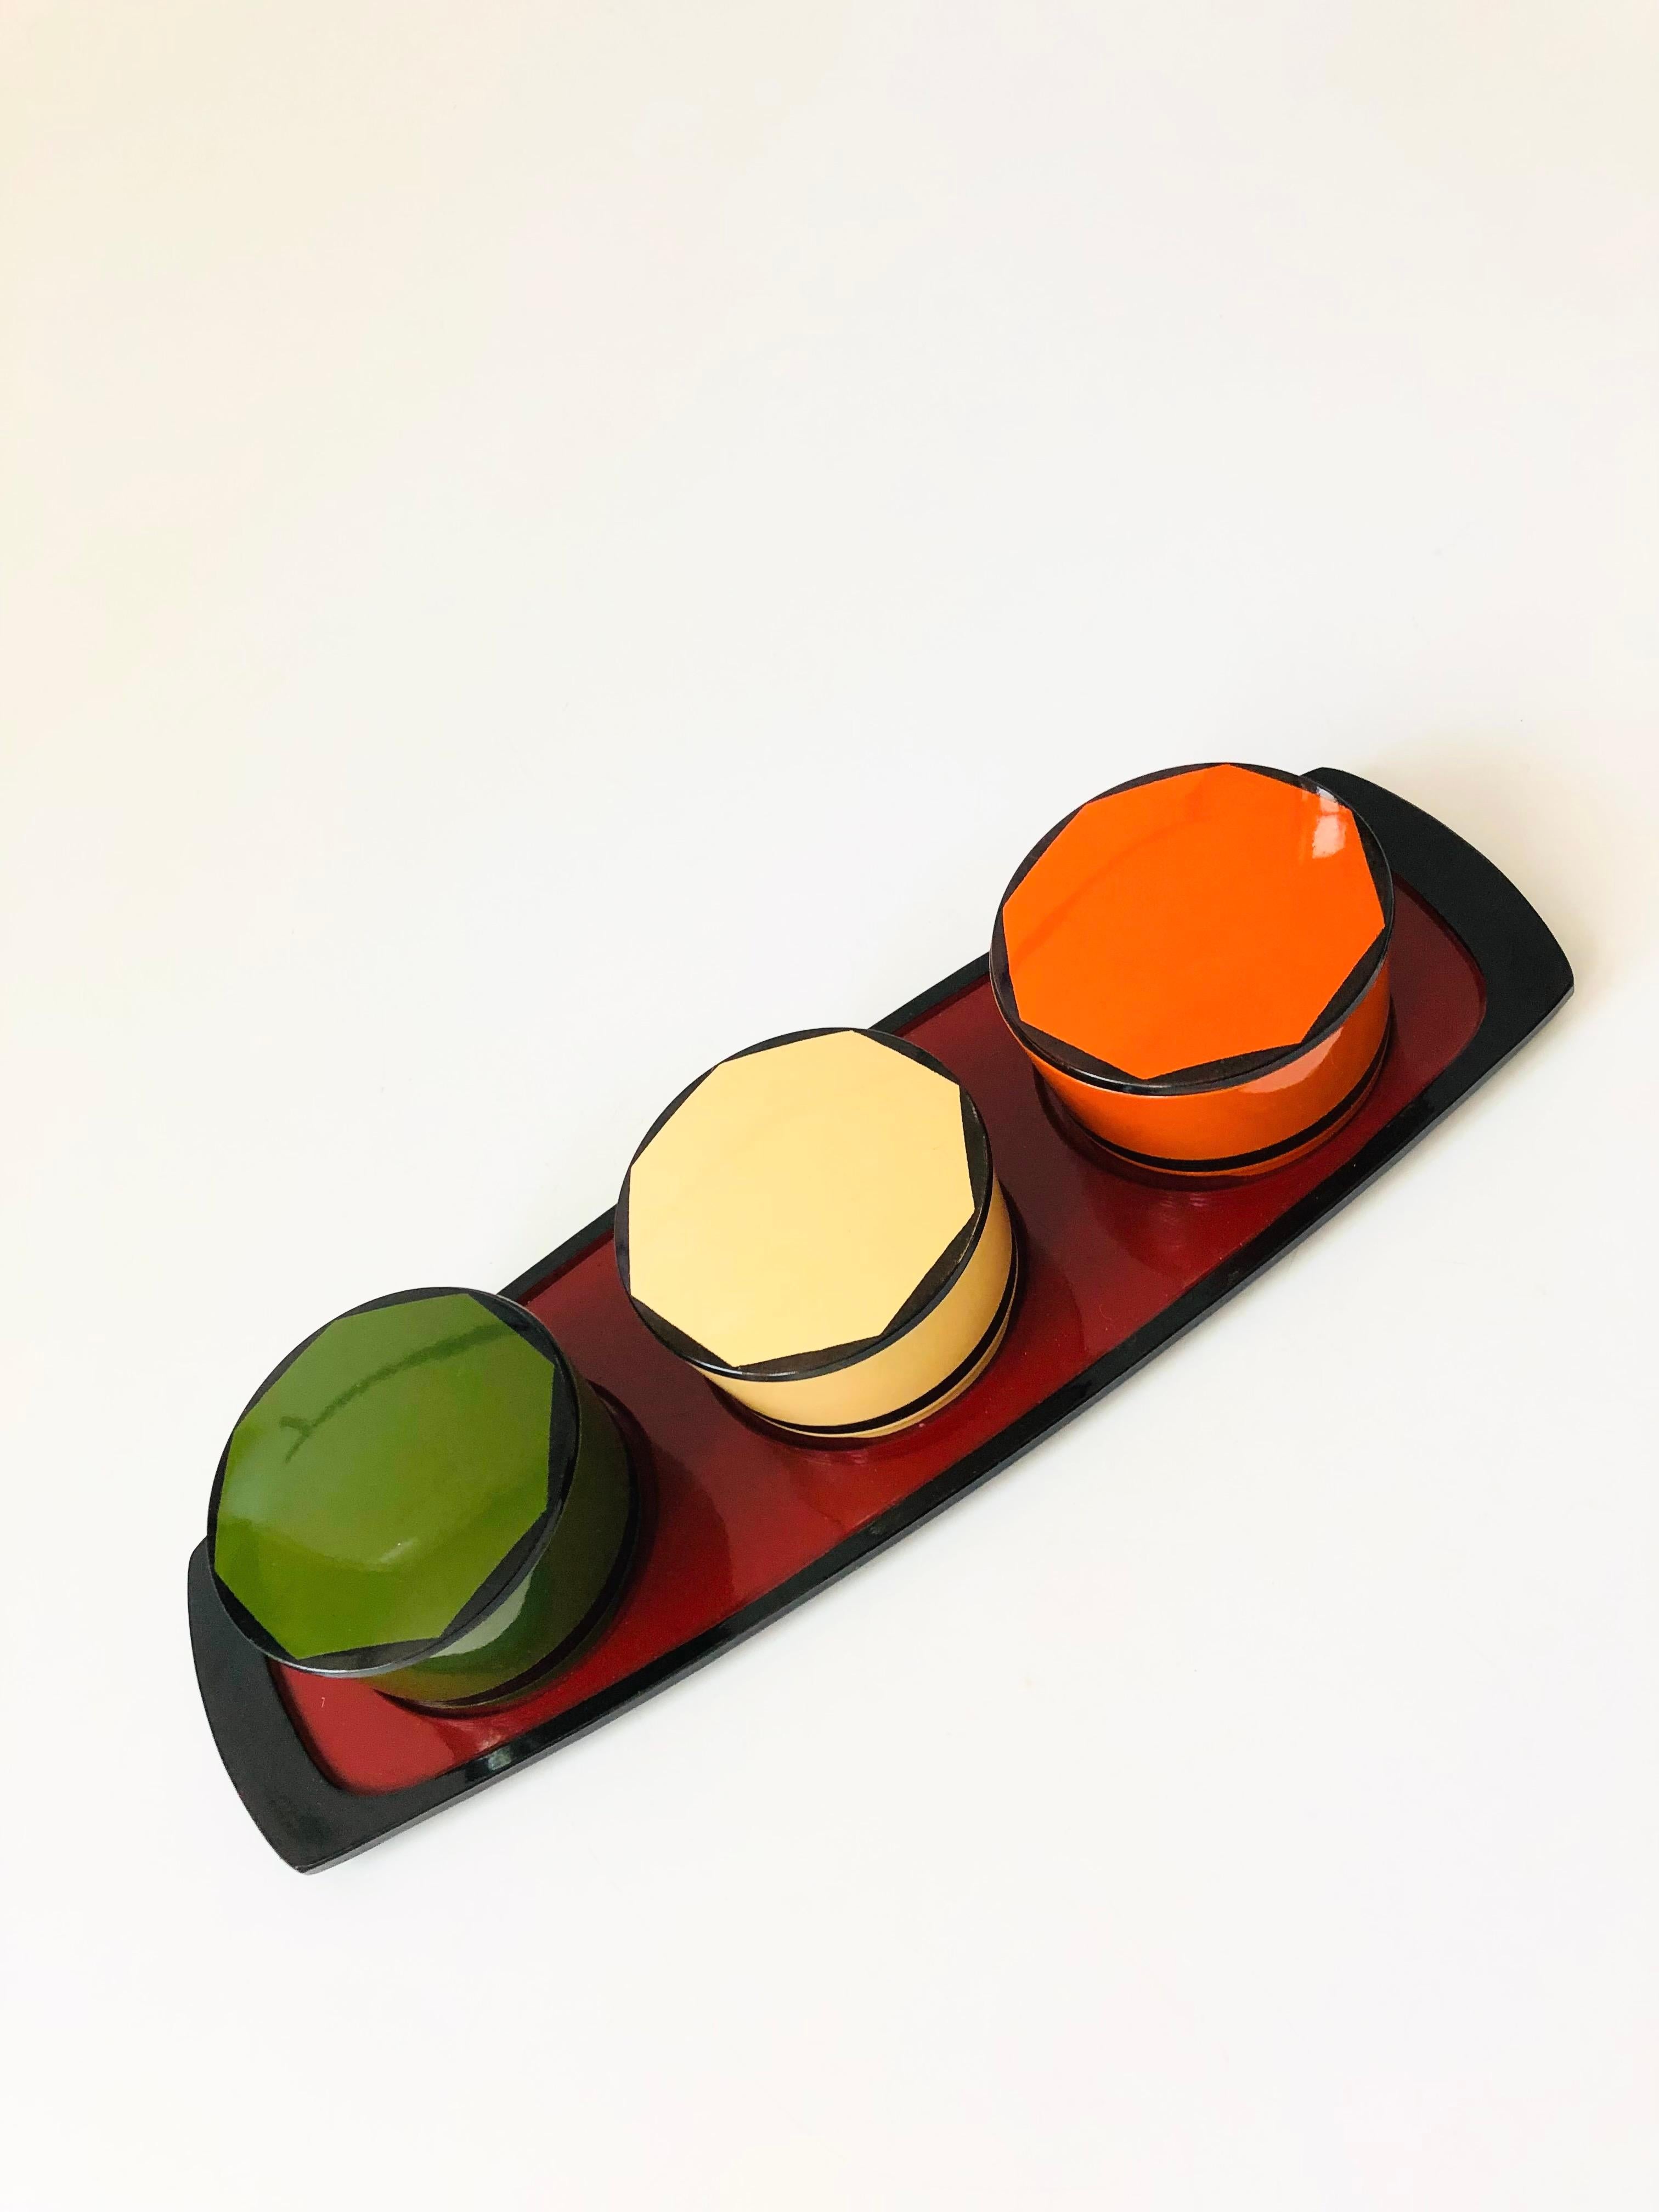 A set of 3 colorful vintage Japanese lacquerware boxes on a matching tray. Great for using as a desk organizer or for serving small dishes.
Measures 14.25